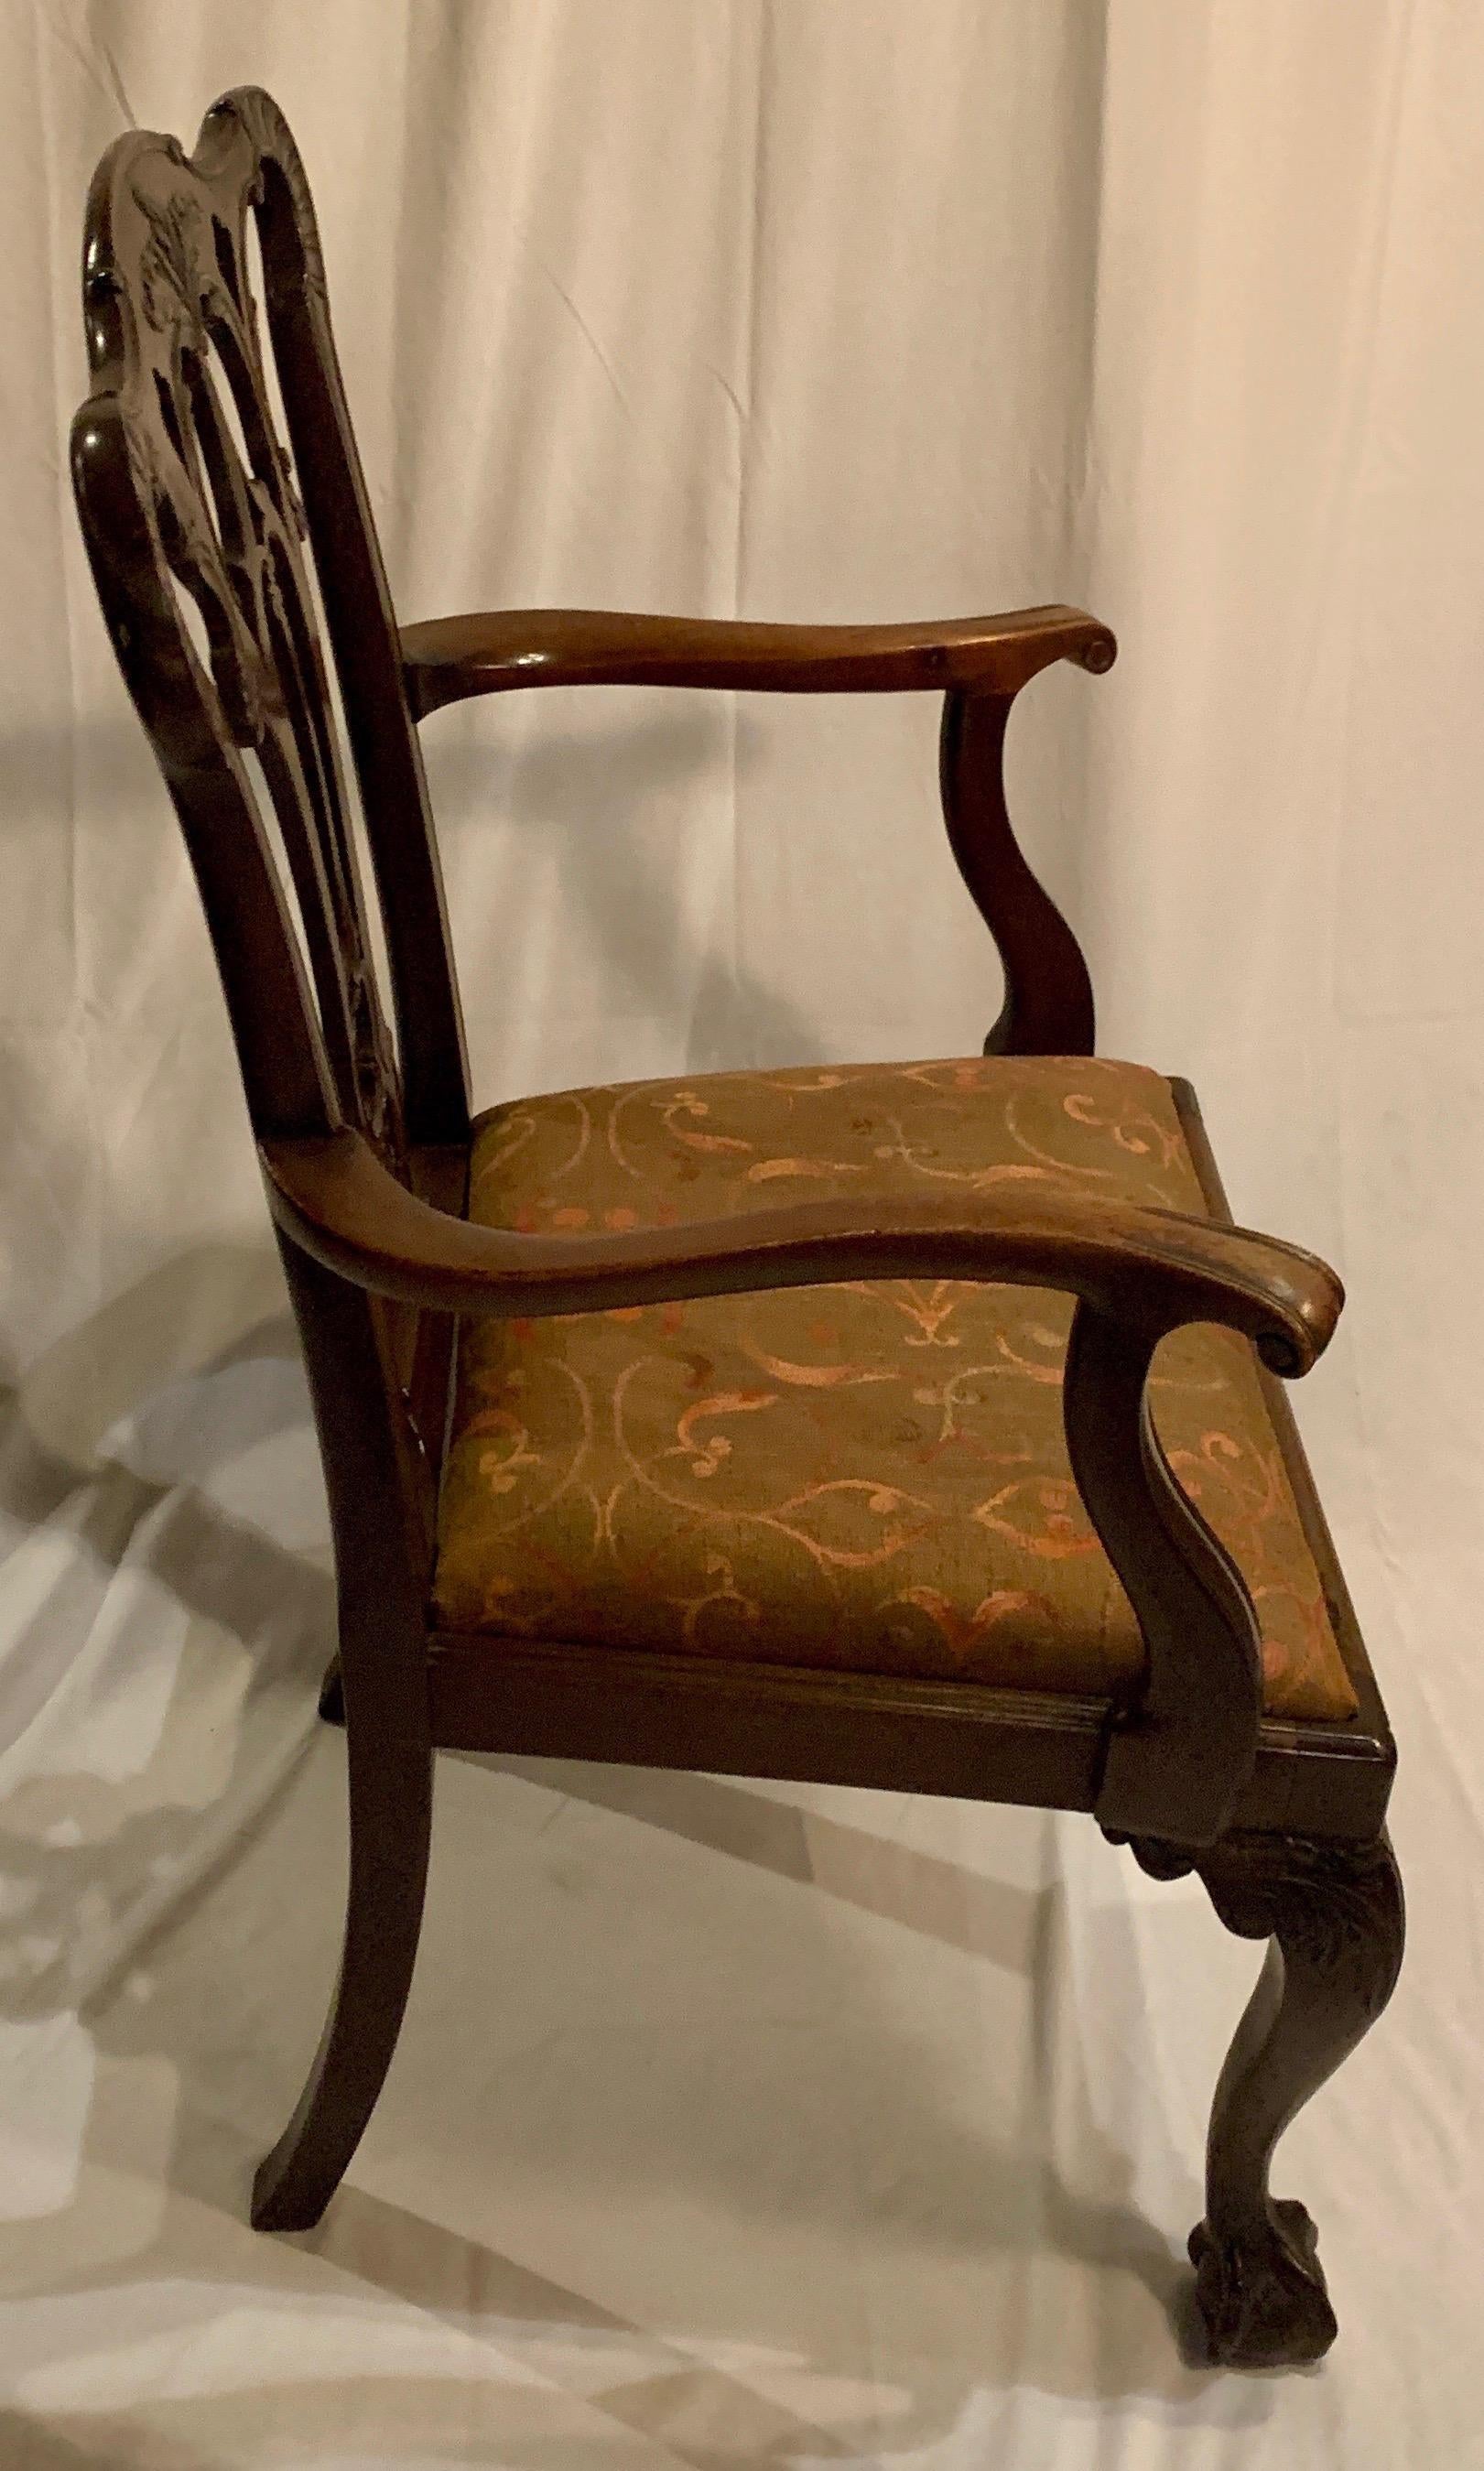 Antique English 19th Century Mahogany Carved Armchair In Good Condition For Sale In New Orleans, LA